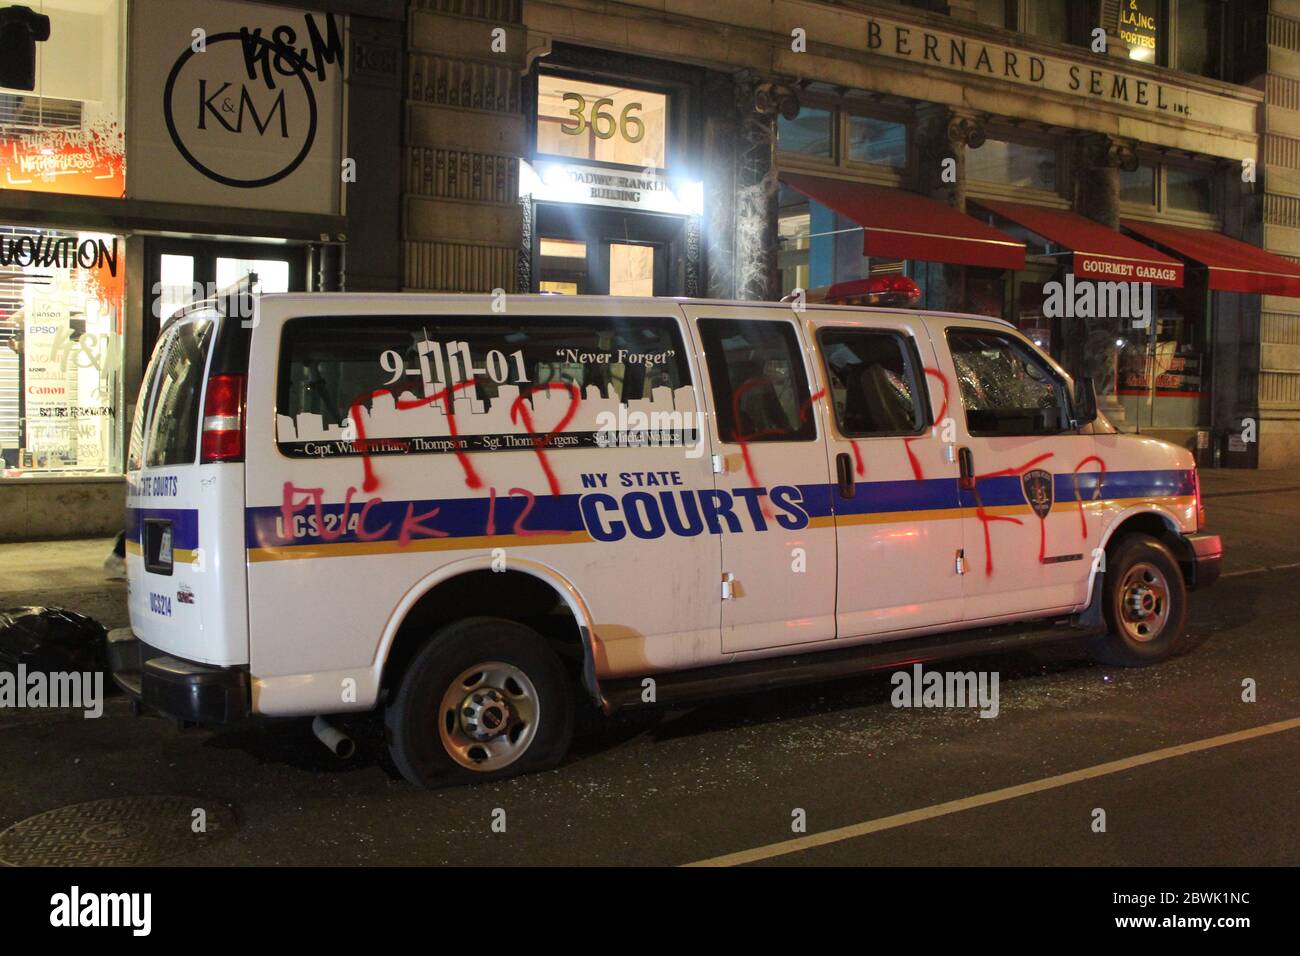 May 31, 2020, New York, New York, USA: Day of peaceful NYC marches gives way to chaos after dark after 4th day of protests over deathÃ‚Â ofÃ‚Â George Floyd.Ã‚Â Looters stormed Lower Manhattan, destroying multiple stores,Ã‚Â stealing items,Ã‚Â lighting fires,Ã‚Â and clashing with police all night long. This NY State Courts car was tagged and one of its tires was punctured. Officials and police believe it is the result of well-organized groups infiltrating peaceful protests, turning them into a riot.Ã‚Â The NYPD arrested more than 250 people. New York City decided to impose a curfew from 11:00 p Stock Photo